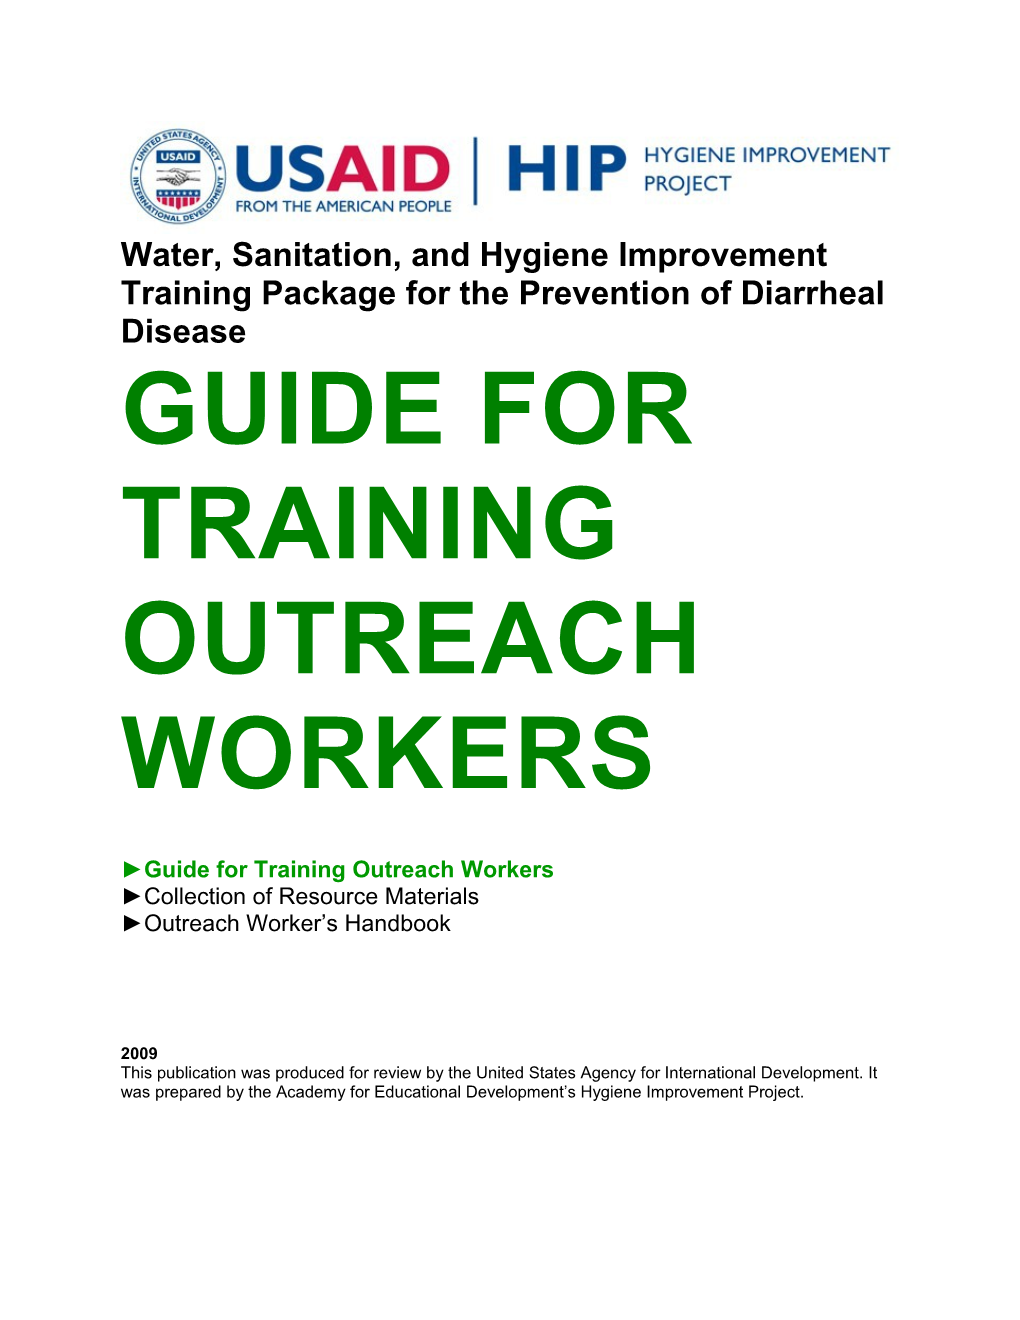 Guide for Training Outreach Workers s1